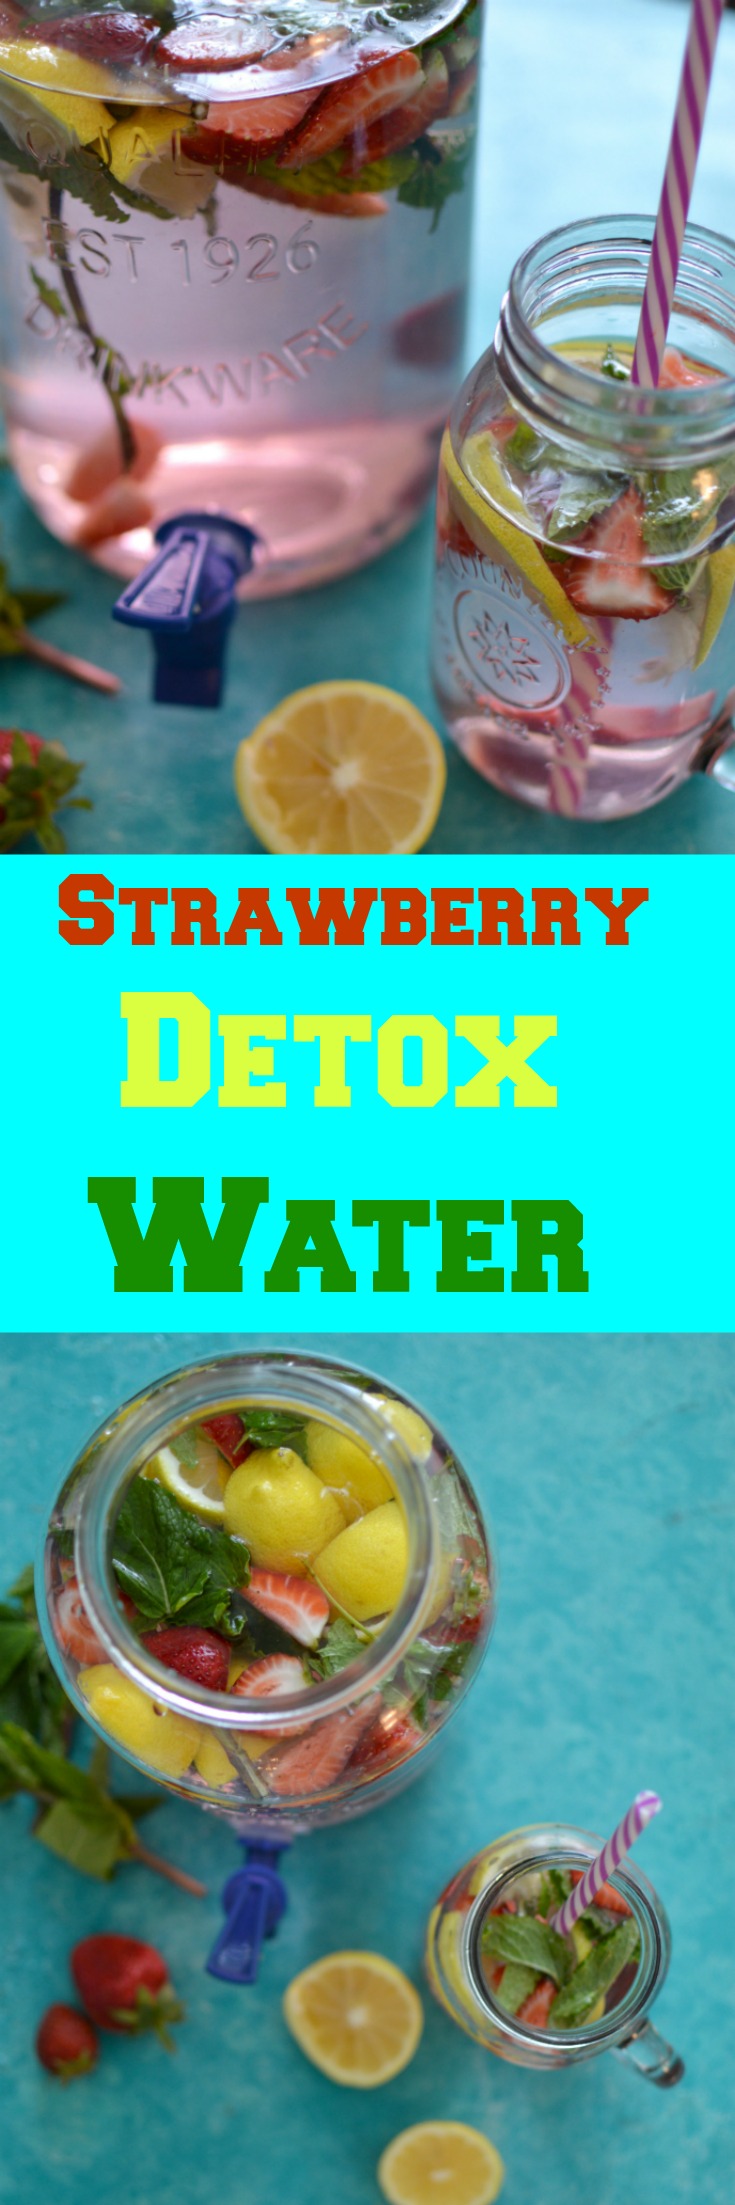 You will absolutely love this Skinny Strawberry Mint Detox water. This Drink actually will Control Your Blood Sugar Levels But It Also is filled with Loads Of Vitamins And Antioxidants. This drink will help flush toxins from your system right away. You'll gain more energy while not compromising on your health!